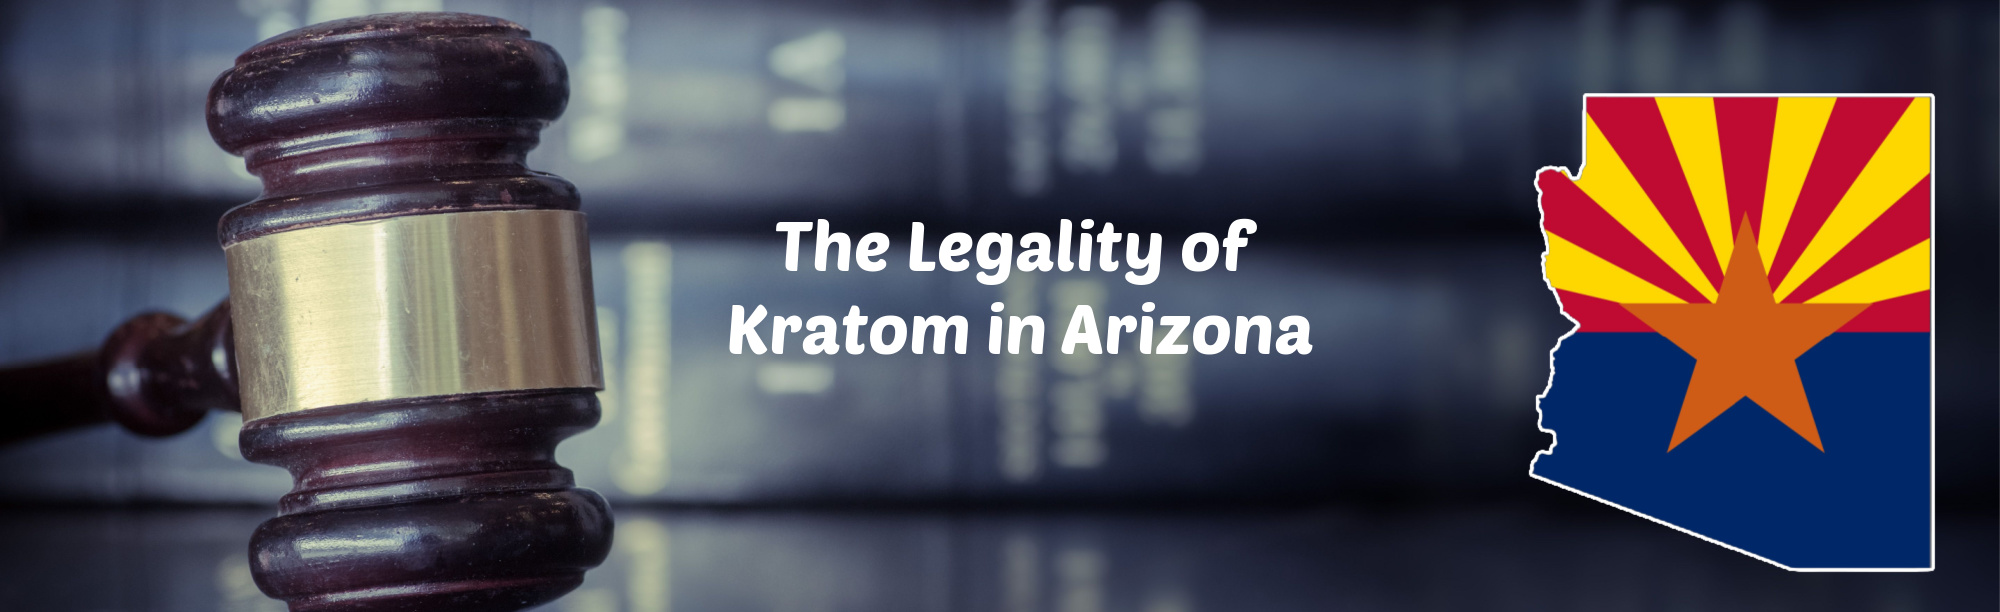 Is Kratom Legal in Arizona? Kratom Facts in the Grand Canyon